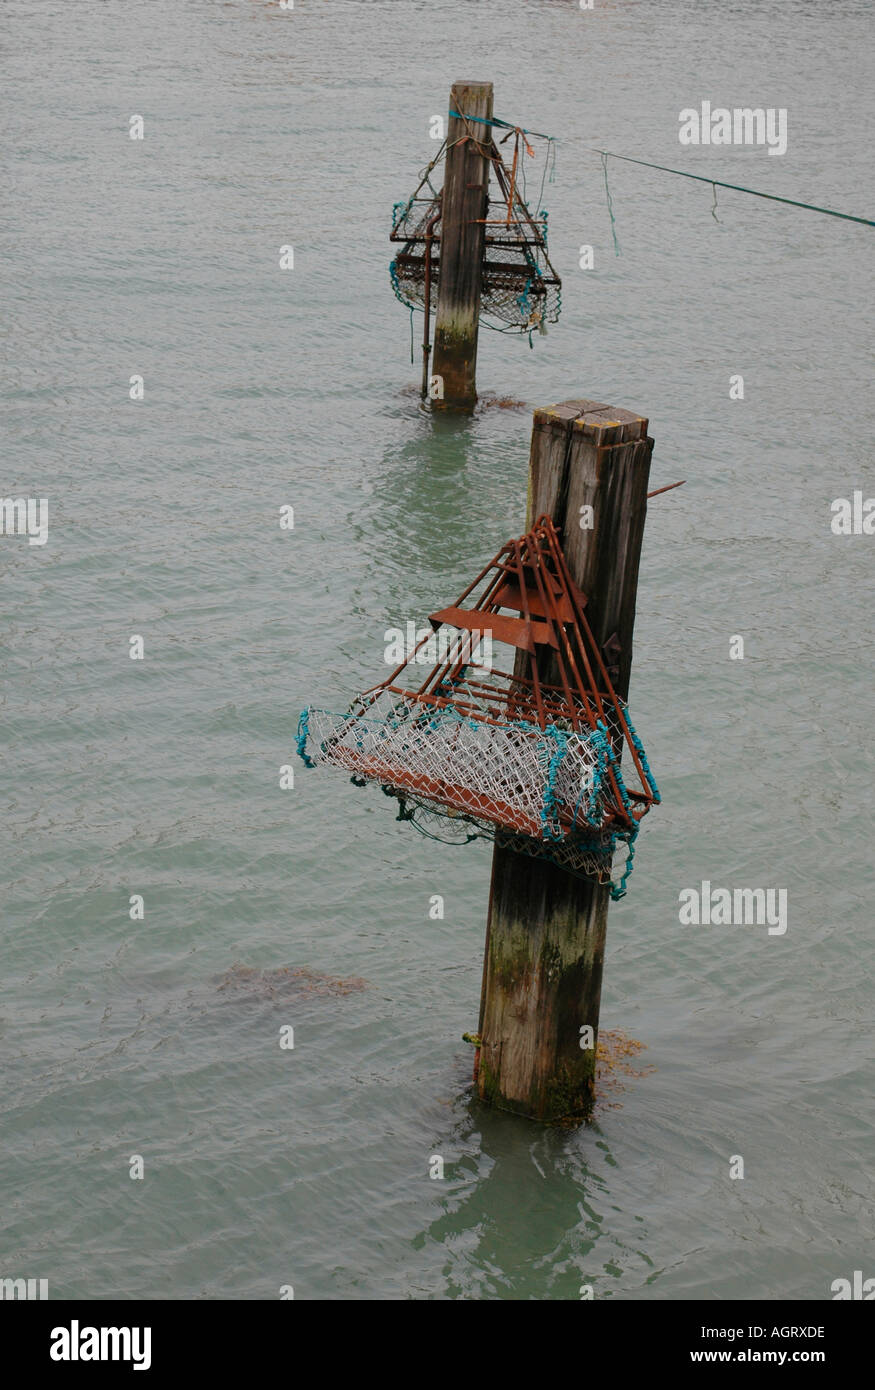 Shellfish trawls hanging safely above the water Stock Photo